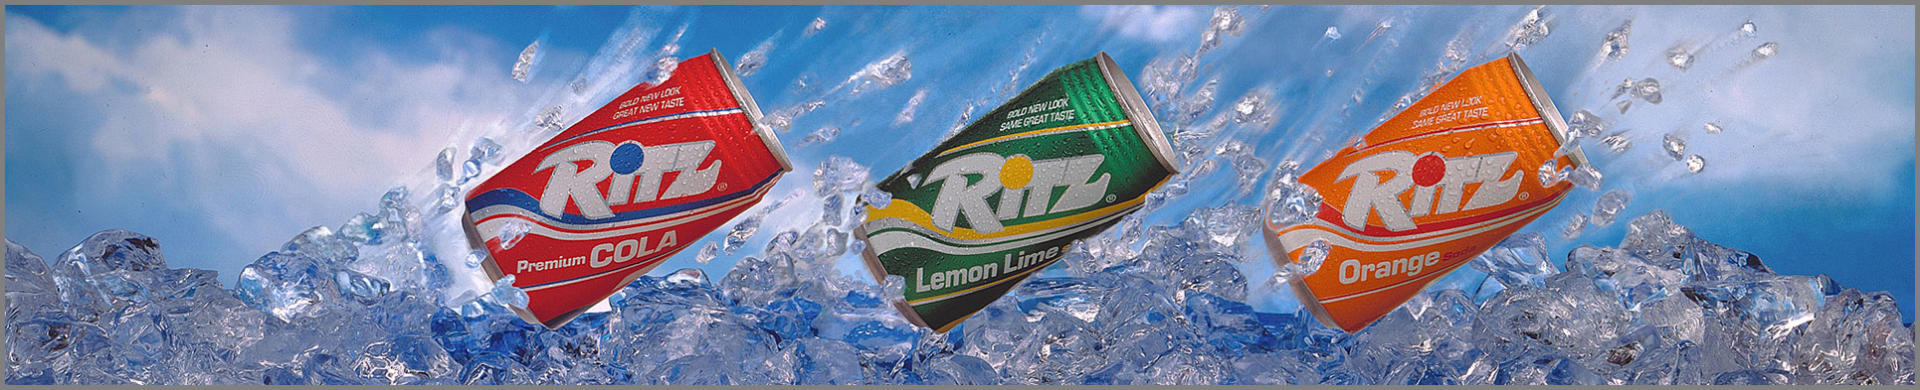 Image for Ritz Beverages Tractor-Trailers